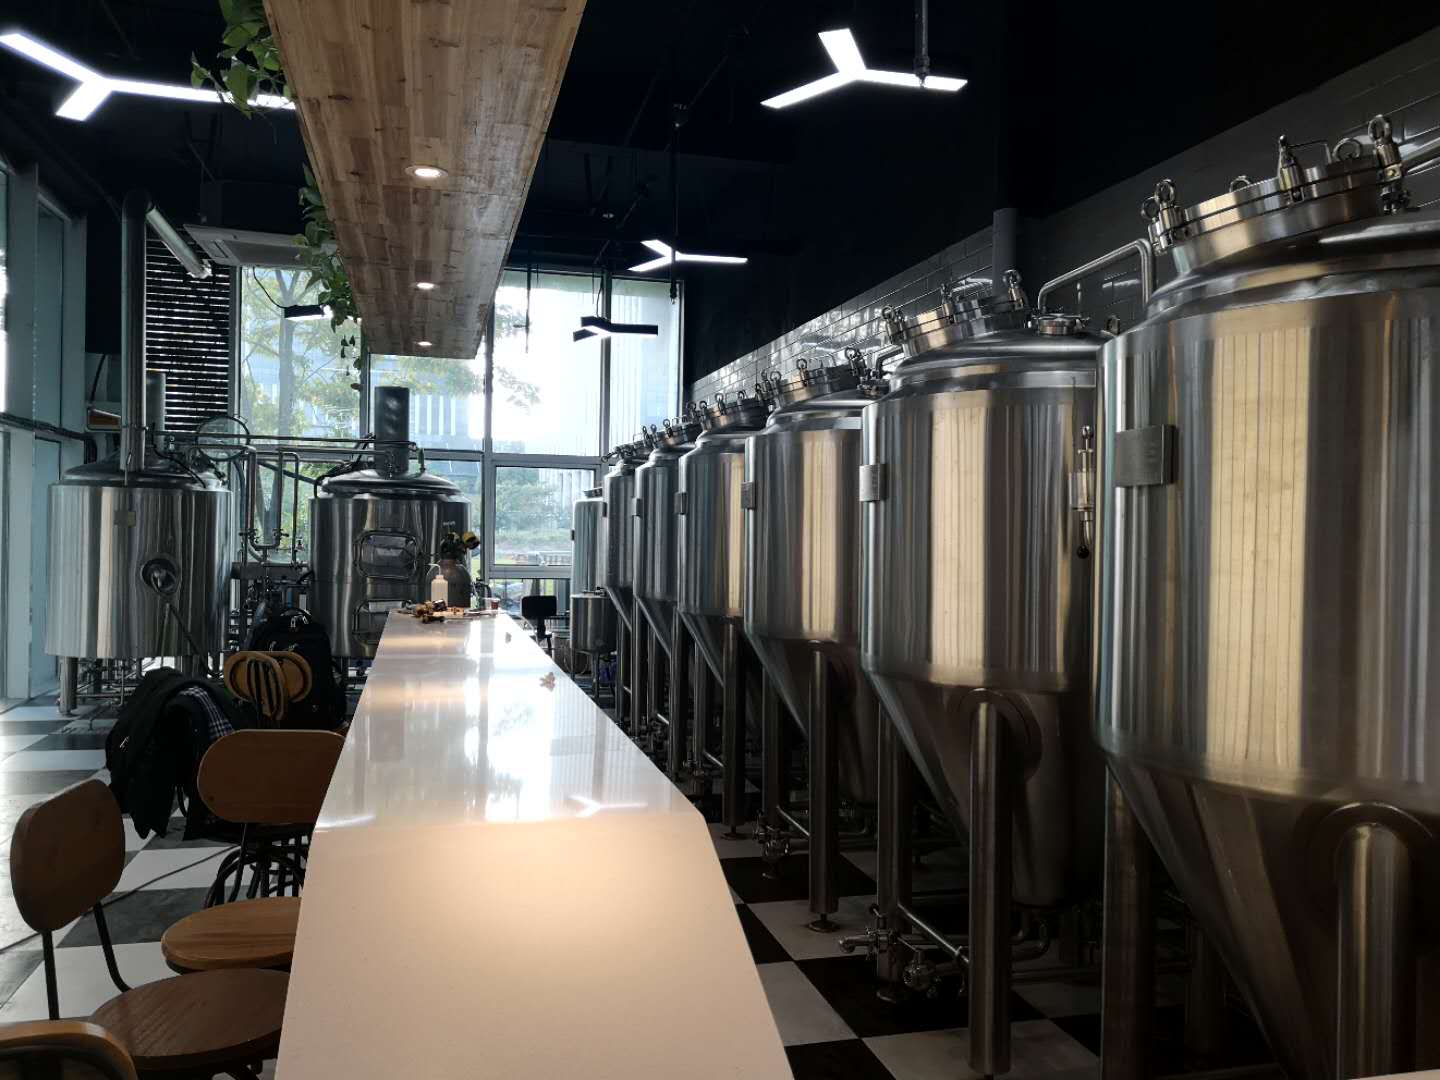 WEMAC 500L beer brewing system factory using in pub & restaurant